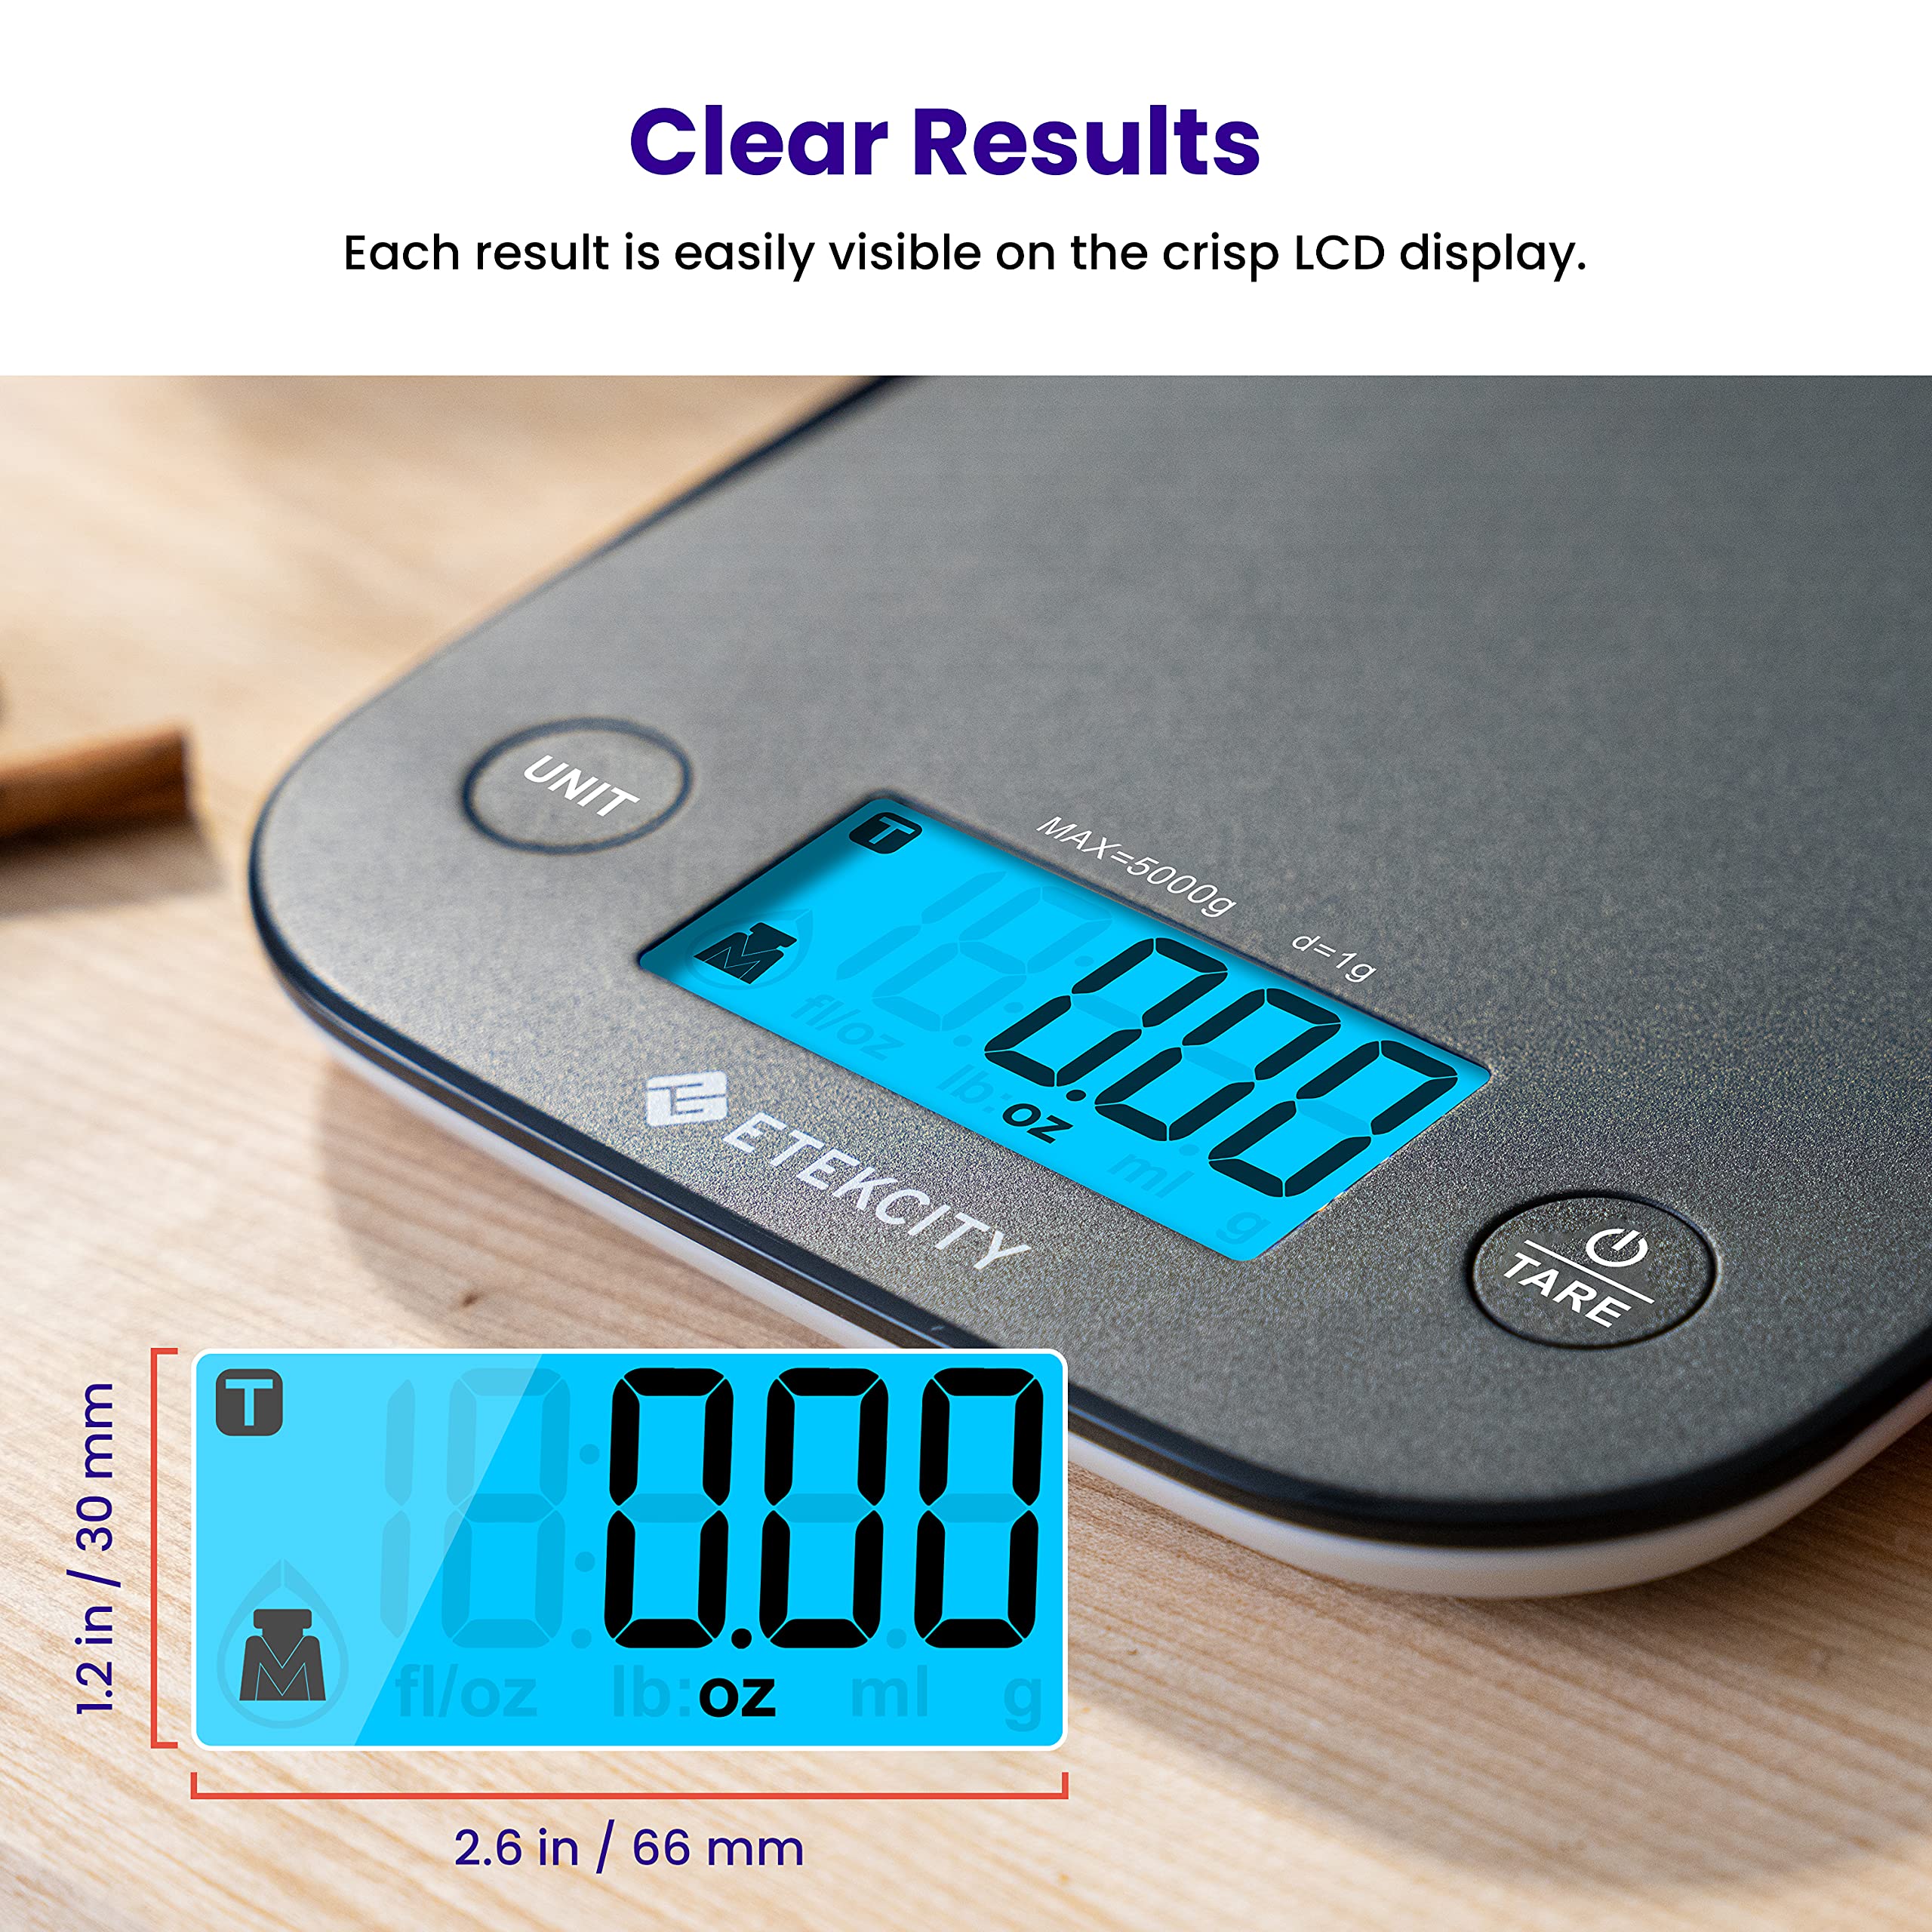 Etekcity Food Kitchen Scale, Digital Weight Grams and Oz for Cooking, Baking, Meal Prep, and Diet, Medium, Carbon Black